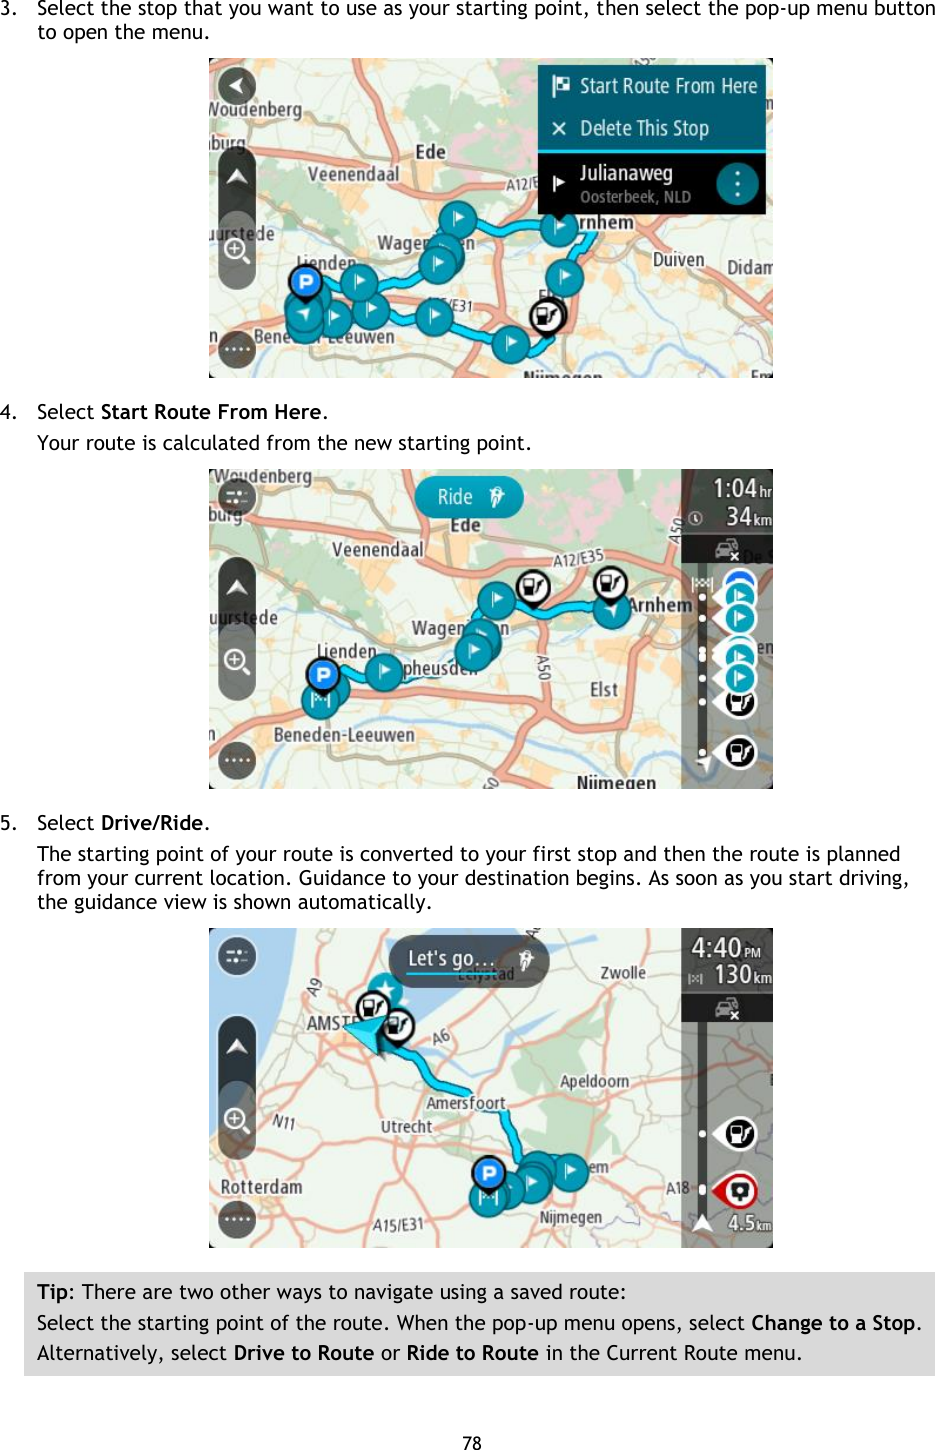 78    3. Select the stop that you want to use as your starting point, then select the pop-up menu button to open the menu.  4. Select Start Route From Here. Your route is calculated from the new starting point.  5. Select Drive/Ride. The starting point of your route is converted to your first stop and then the route is planned from your current location. Guidance to your destination begins. As soon as you start driving, the guidance view is shown automatically.  Tip: There are two other ways to navigate using a saved route: Select the starting point of the route. When the pop-up menu opens, select Change to a Stop. Alternatively, select Drive to Route or Ride to Route in the Current Route menu.  